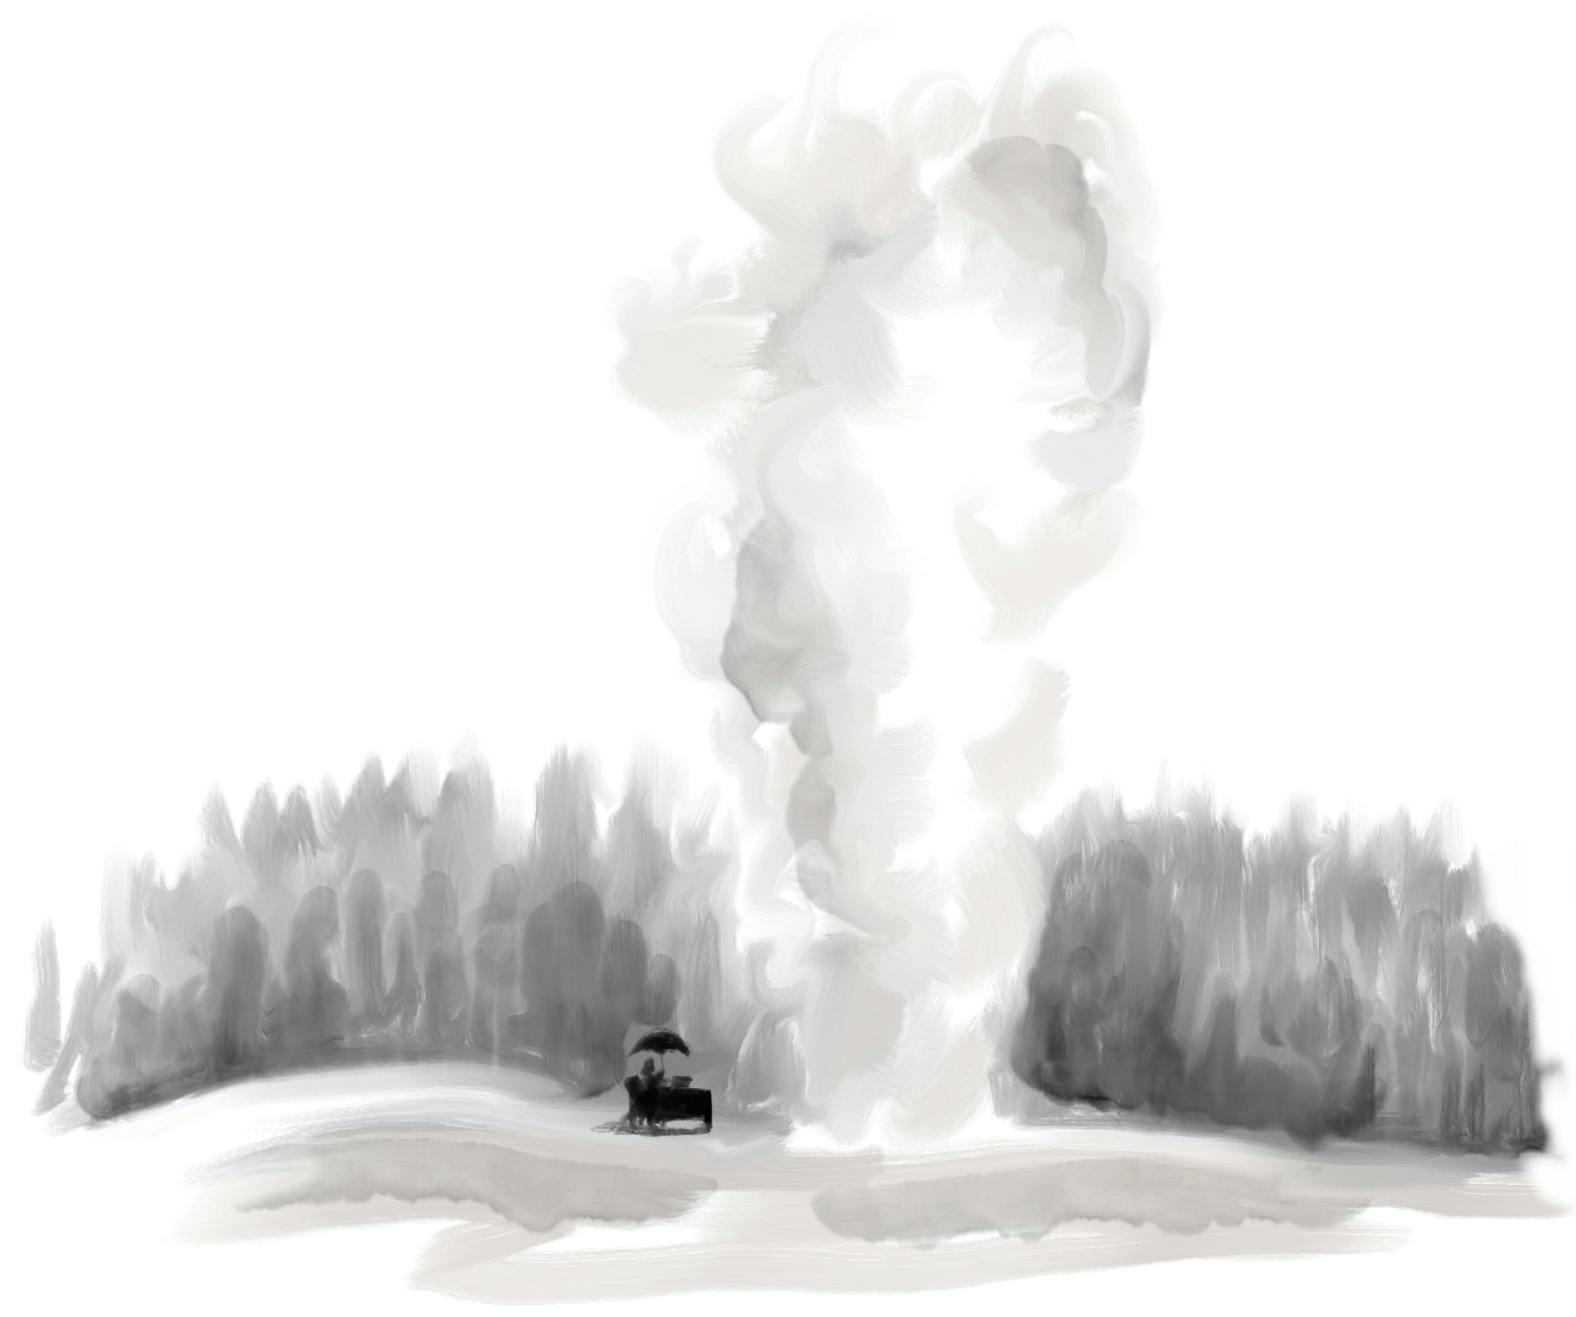 Cartoon by Bob Eckstein: next to an erupting geyser in front of a forest, a writer sits working at a desk, protected by an umbrella.